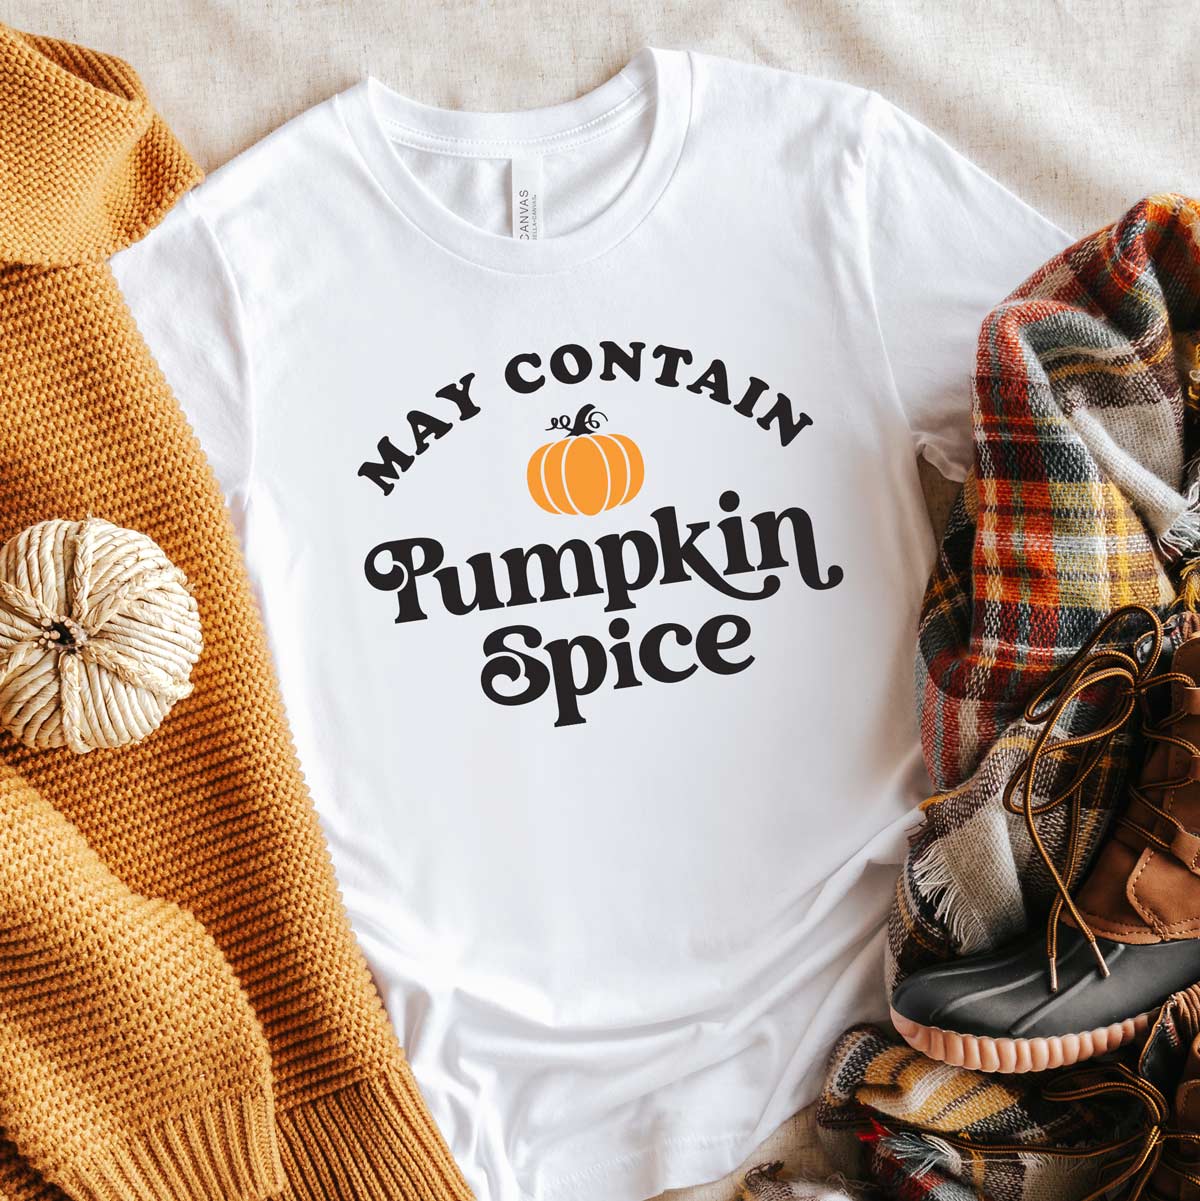 Weekend Craft May Contain Pumpkin Spice